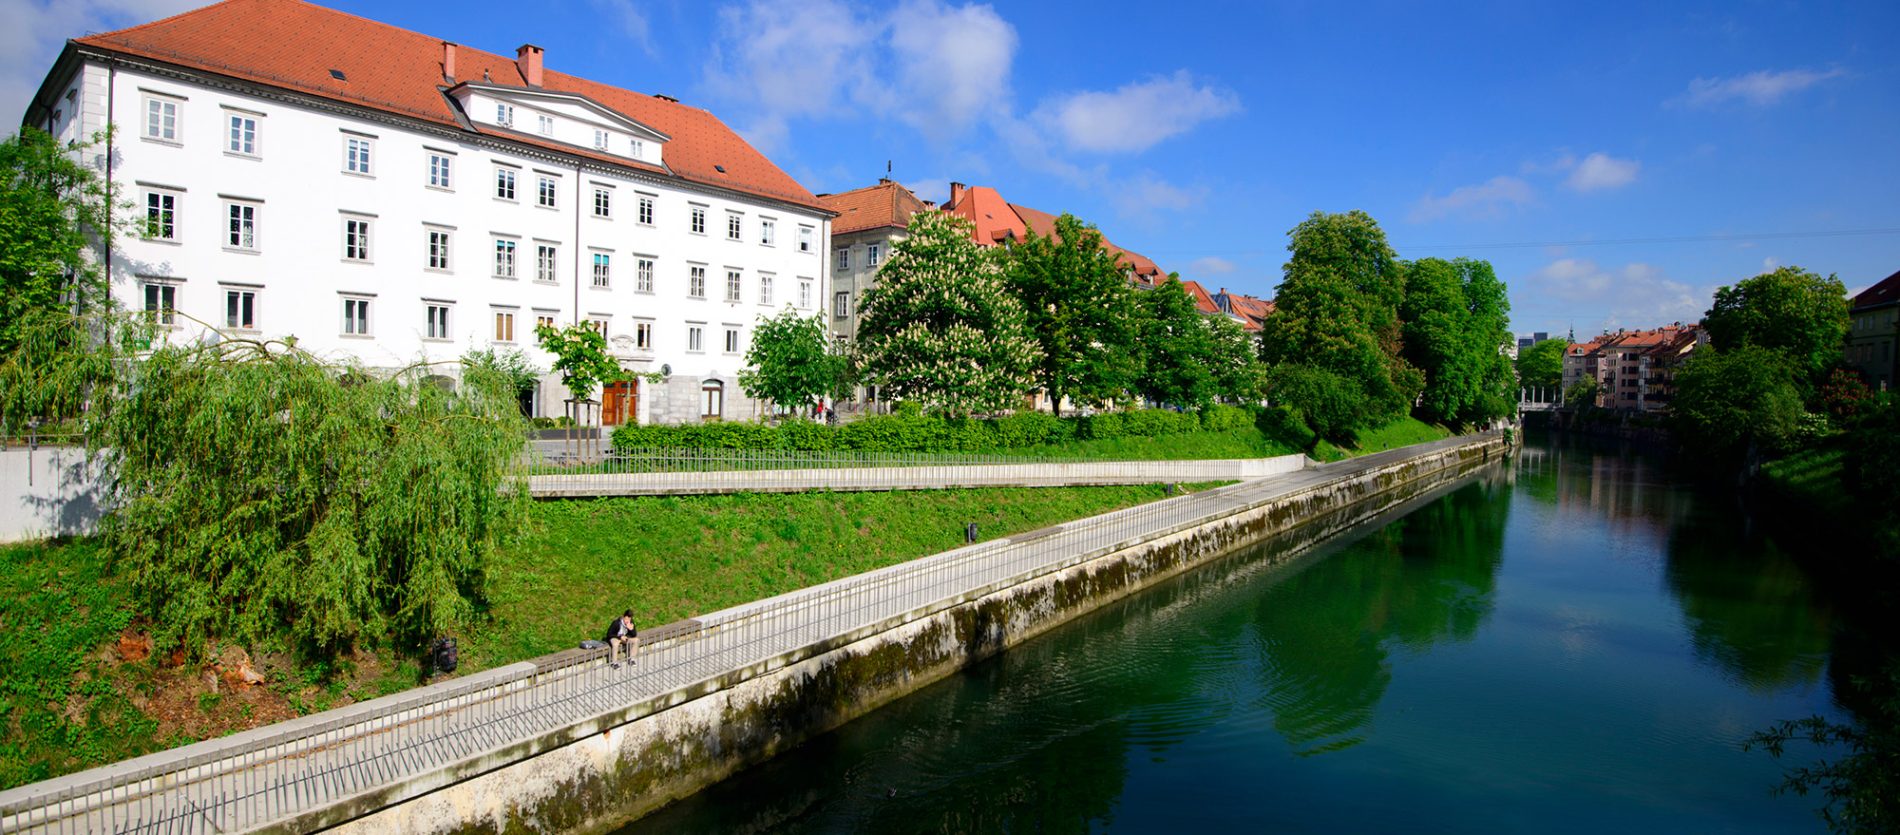 Stay in Slovenia's most beautiful destinations